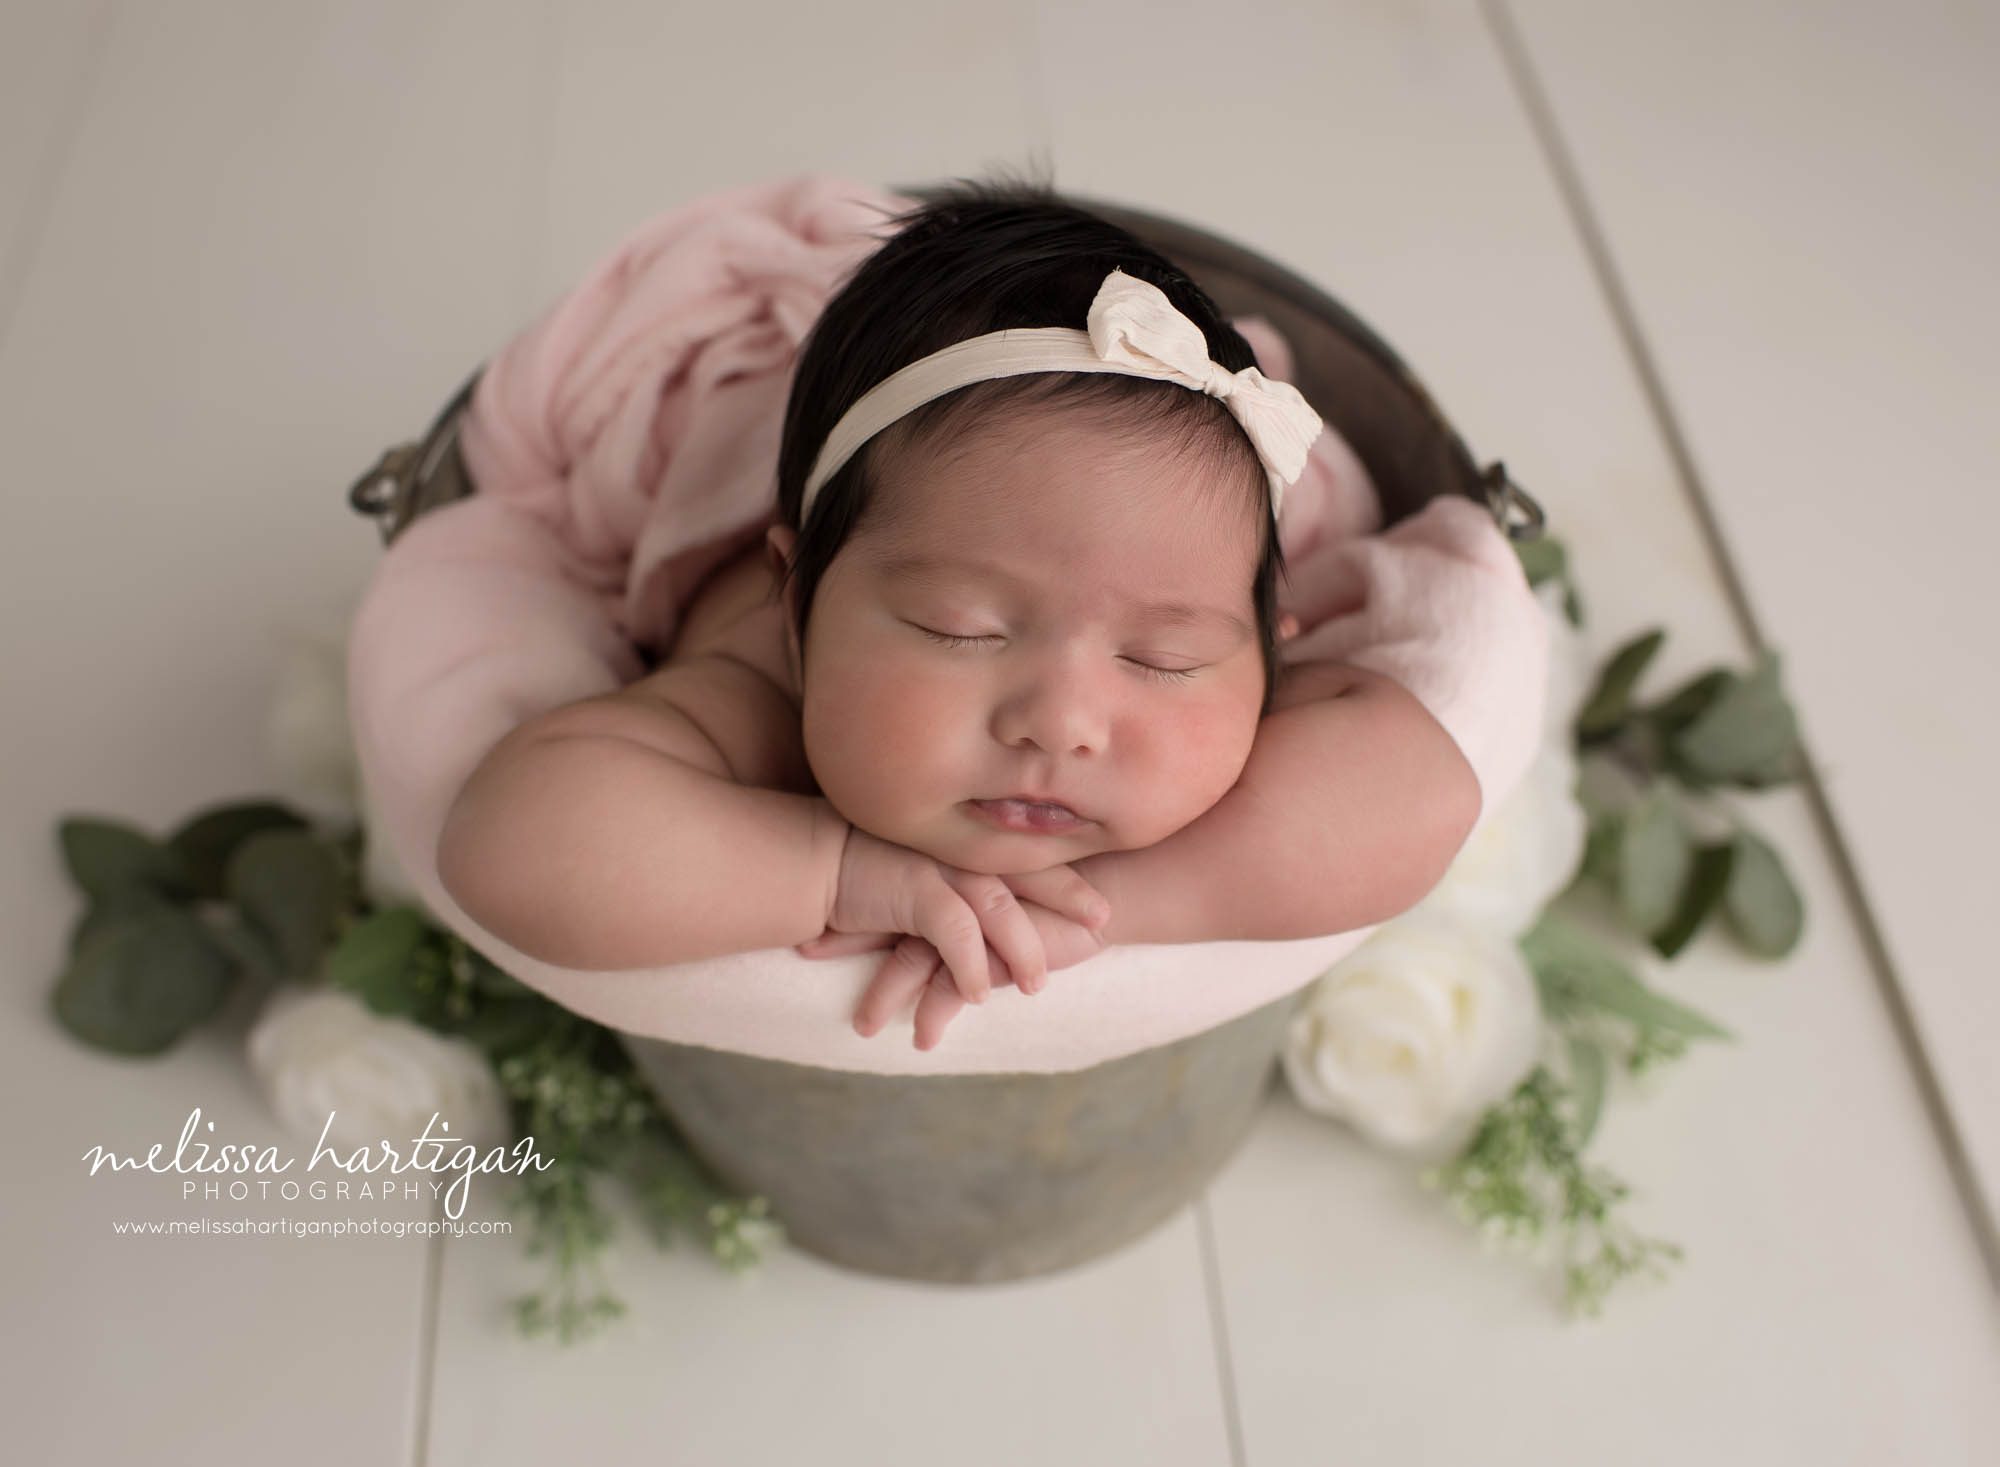 newborn baby girl posed in bucket with pink wrap and green foilage branford ct baby photography